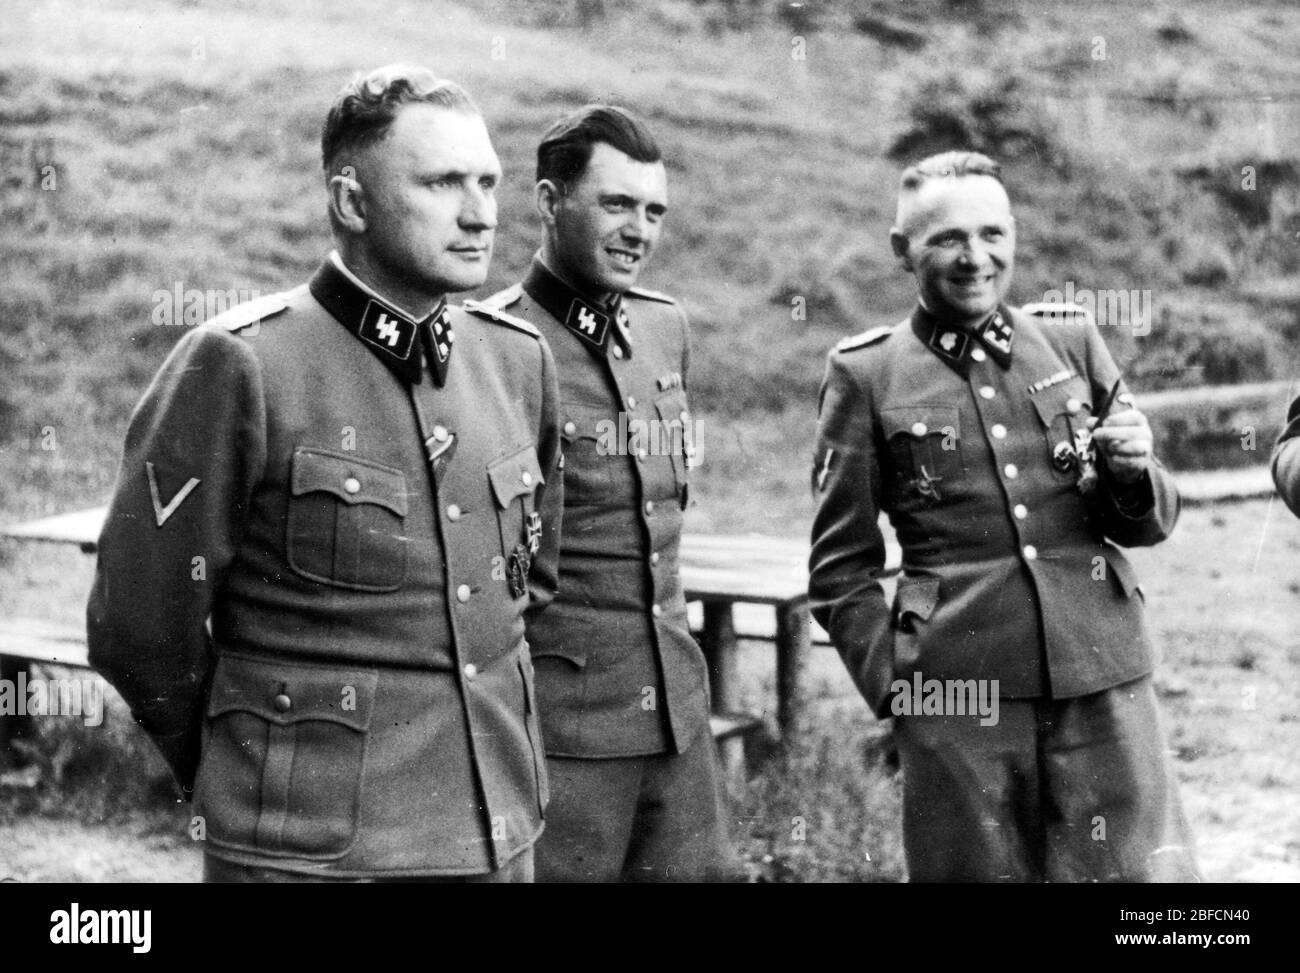 JOSEF MENGELE (1911-1979) German SS officer and physician at (centre) with Richard Baer at left and Rudolf Höss at right. Photographed at Solahütte an  SS resort near Auschwitz in mid 1844. Baer was Auschwitz commandant from May 1944.  Höss has been the first commandant. Stock Photo